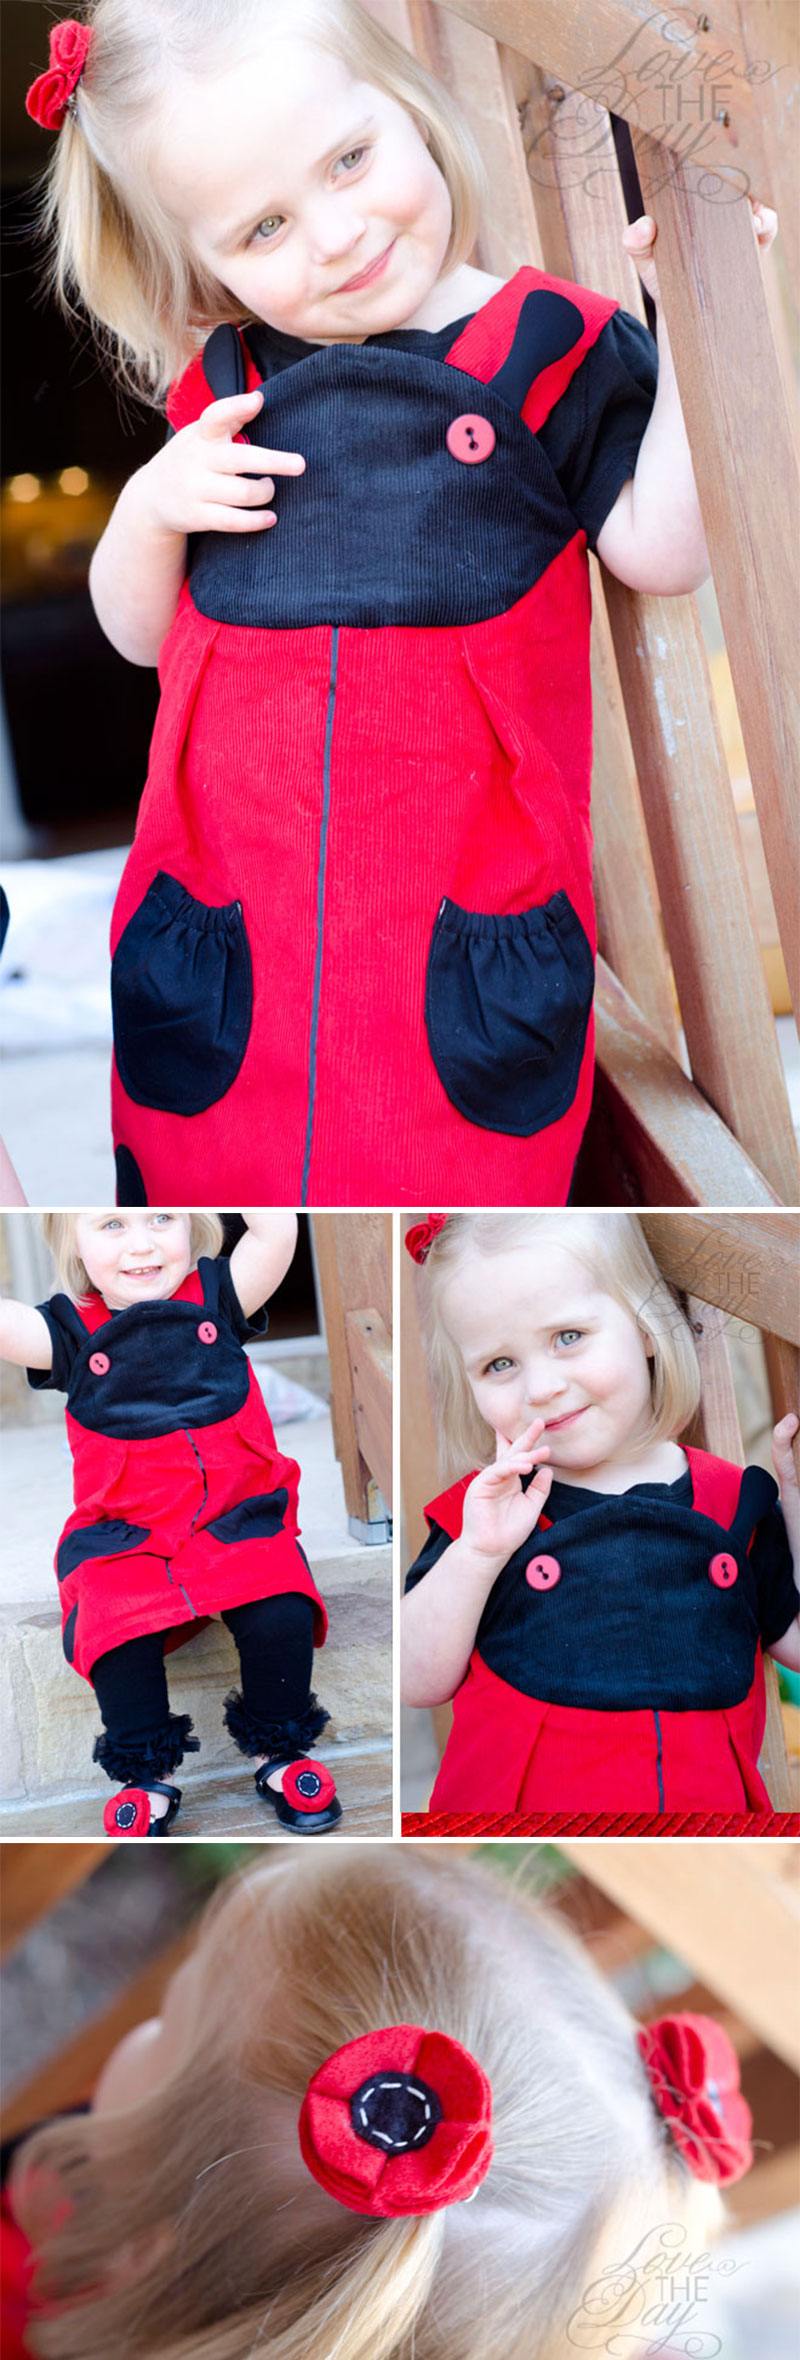 Ladybug Party Favors by Lindi Haws of Love The Day